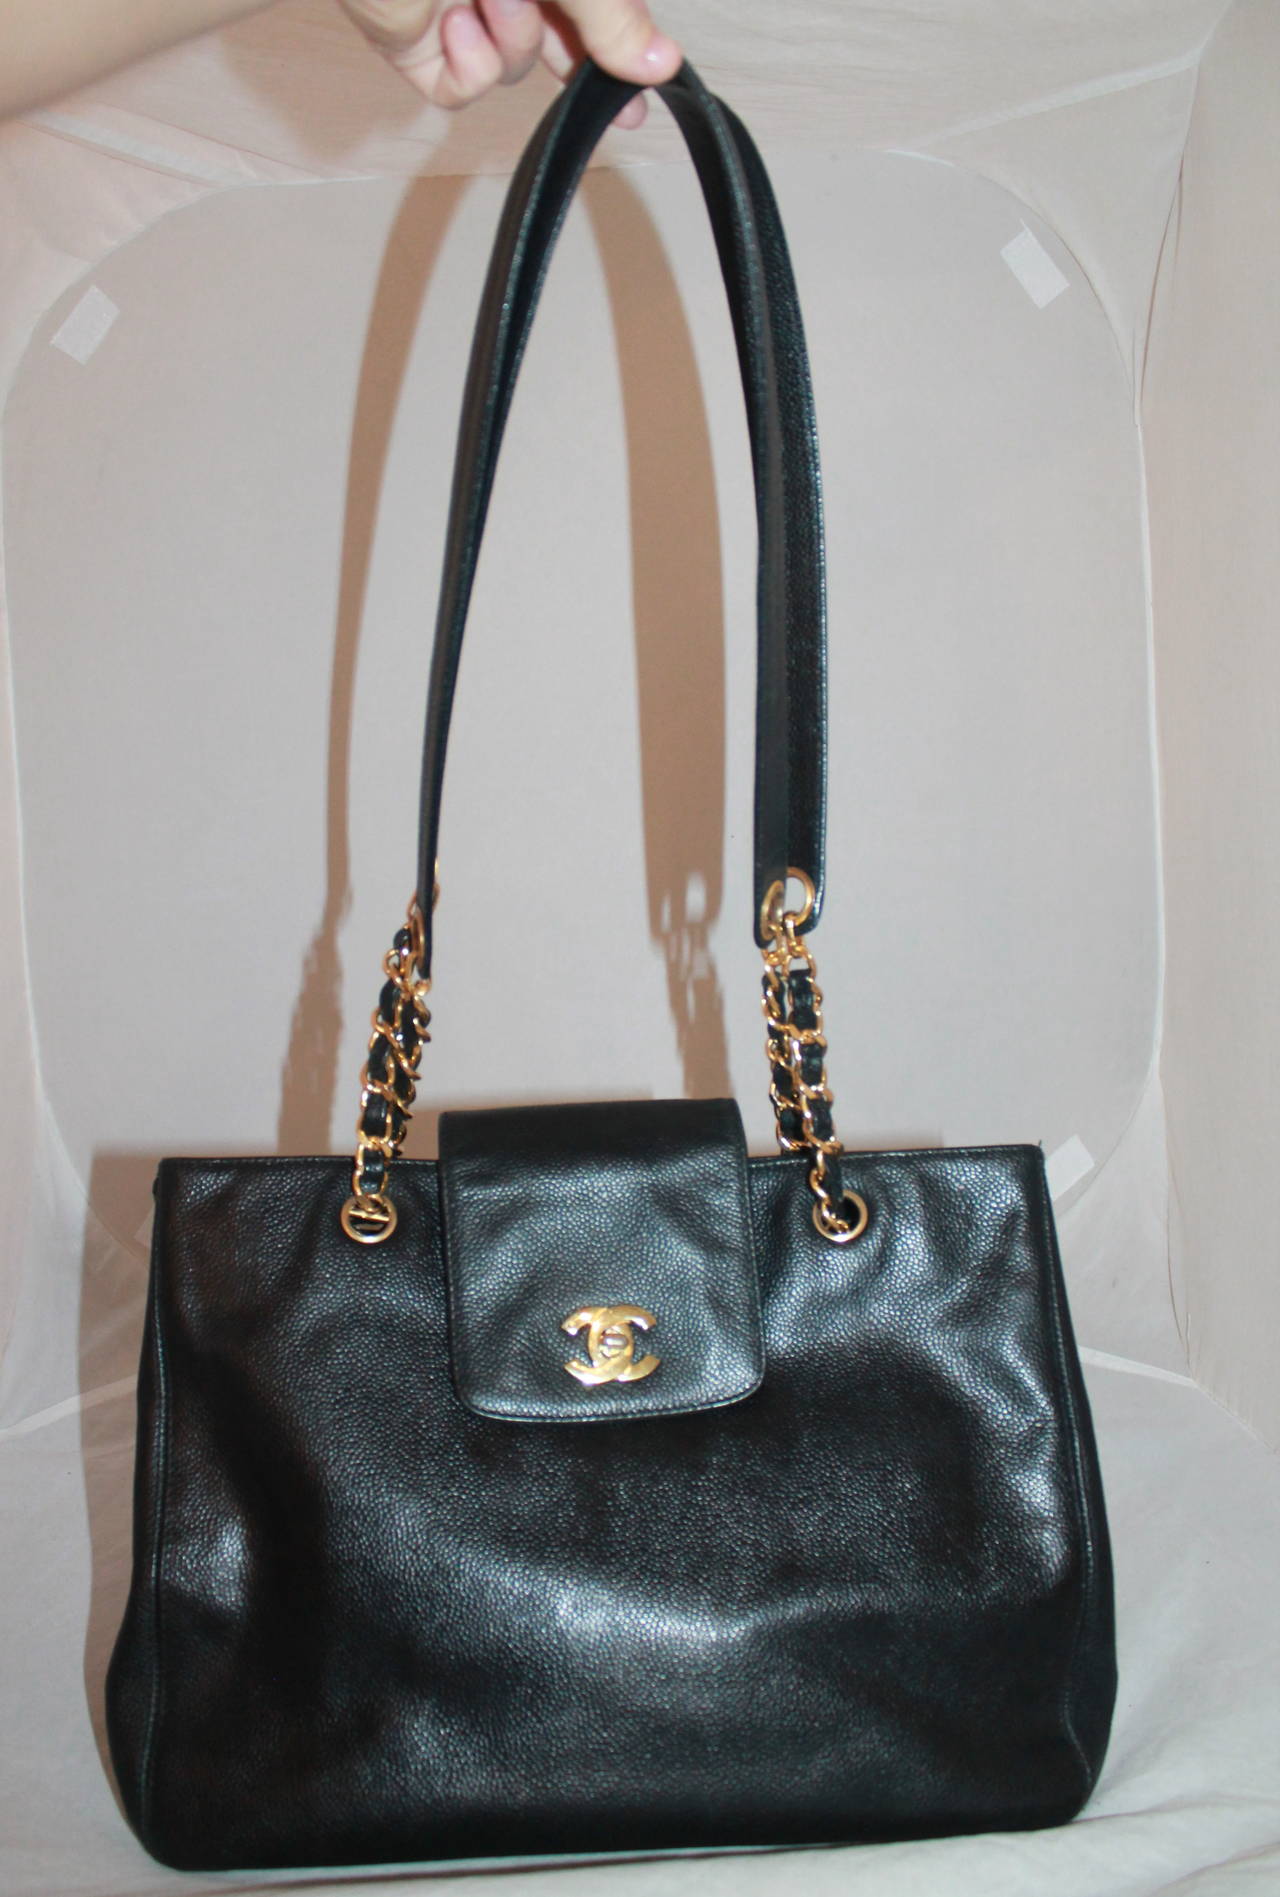 Chanel Vintage Black Caviar Tote Handbag GHW. This bag is in very good condition and is very roomy on the inside. The Chanel stamp make the dating on the bag unclear but it appears to be circa 1980-2000s. 

Measurements:
Length- 10